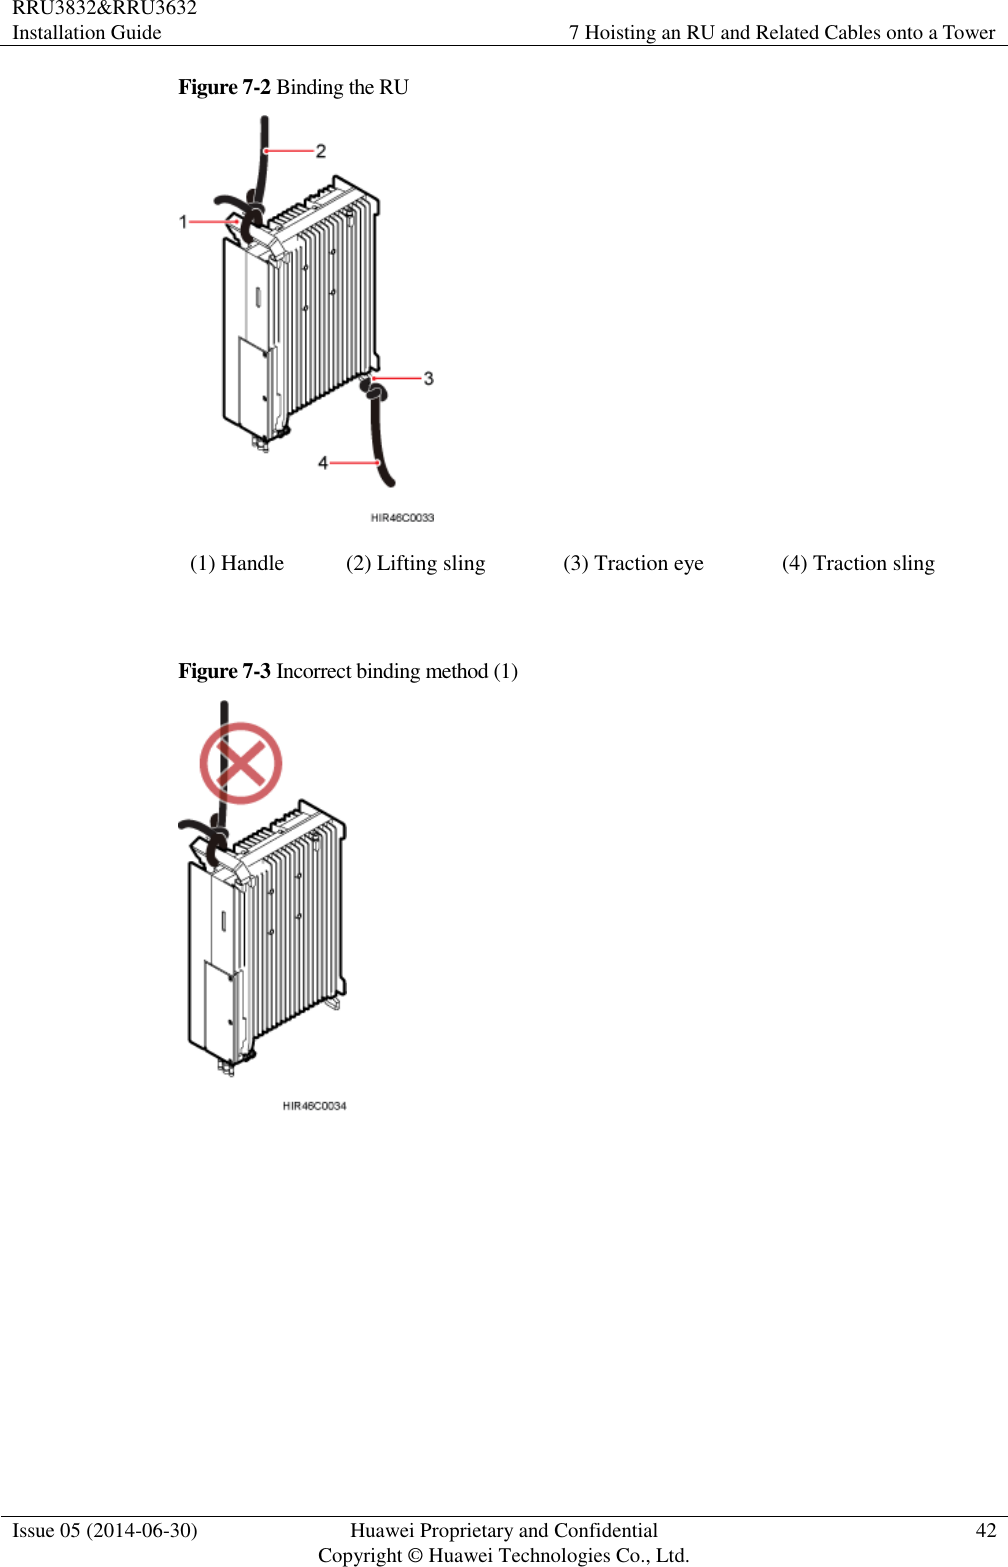 RRU3832&amp;RRU3632 Installation Guide 7 Hoisting an RU and Related Cables onto a Tower  Issue 05 (2014-06-30) Huawei Proprietary and Confidential                                     Copyright © Huawei Technologies Co., Ltd. 42  Figure 7-2 Binding the RU  (1) Handle (2) Lifting sling (3) Traction eye (4) Traction sling  Figure 7-3 Incorrect binding method (1)   